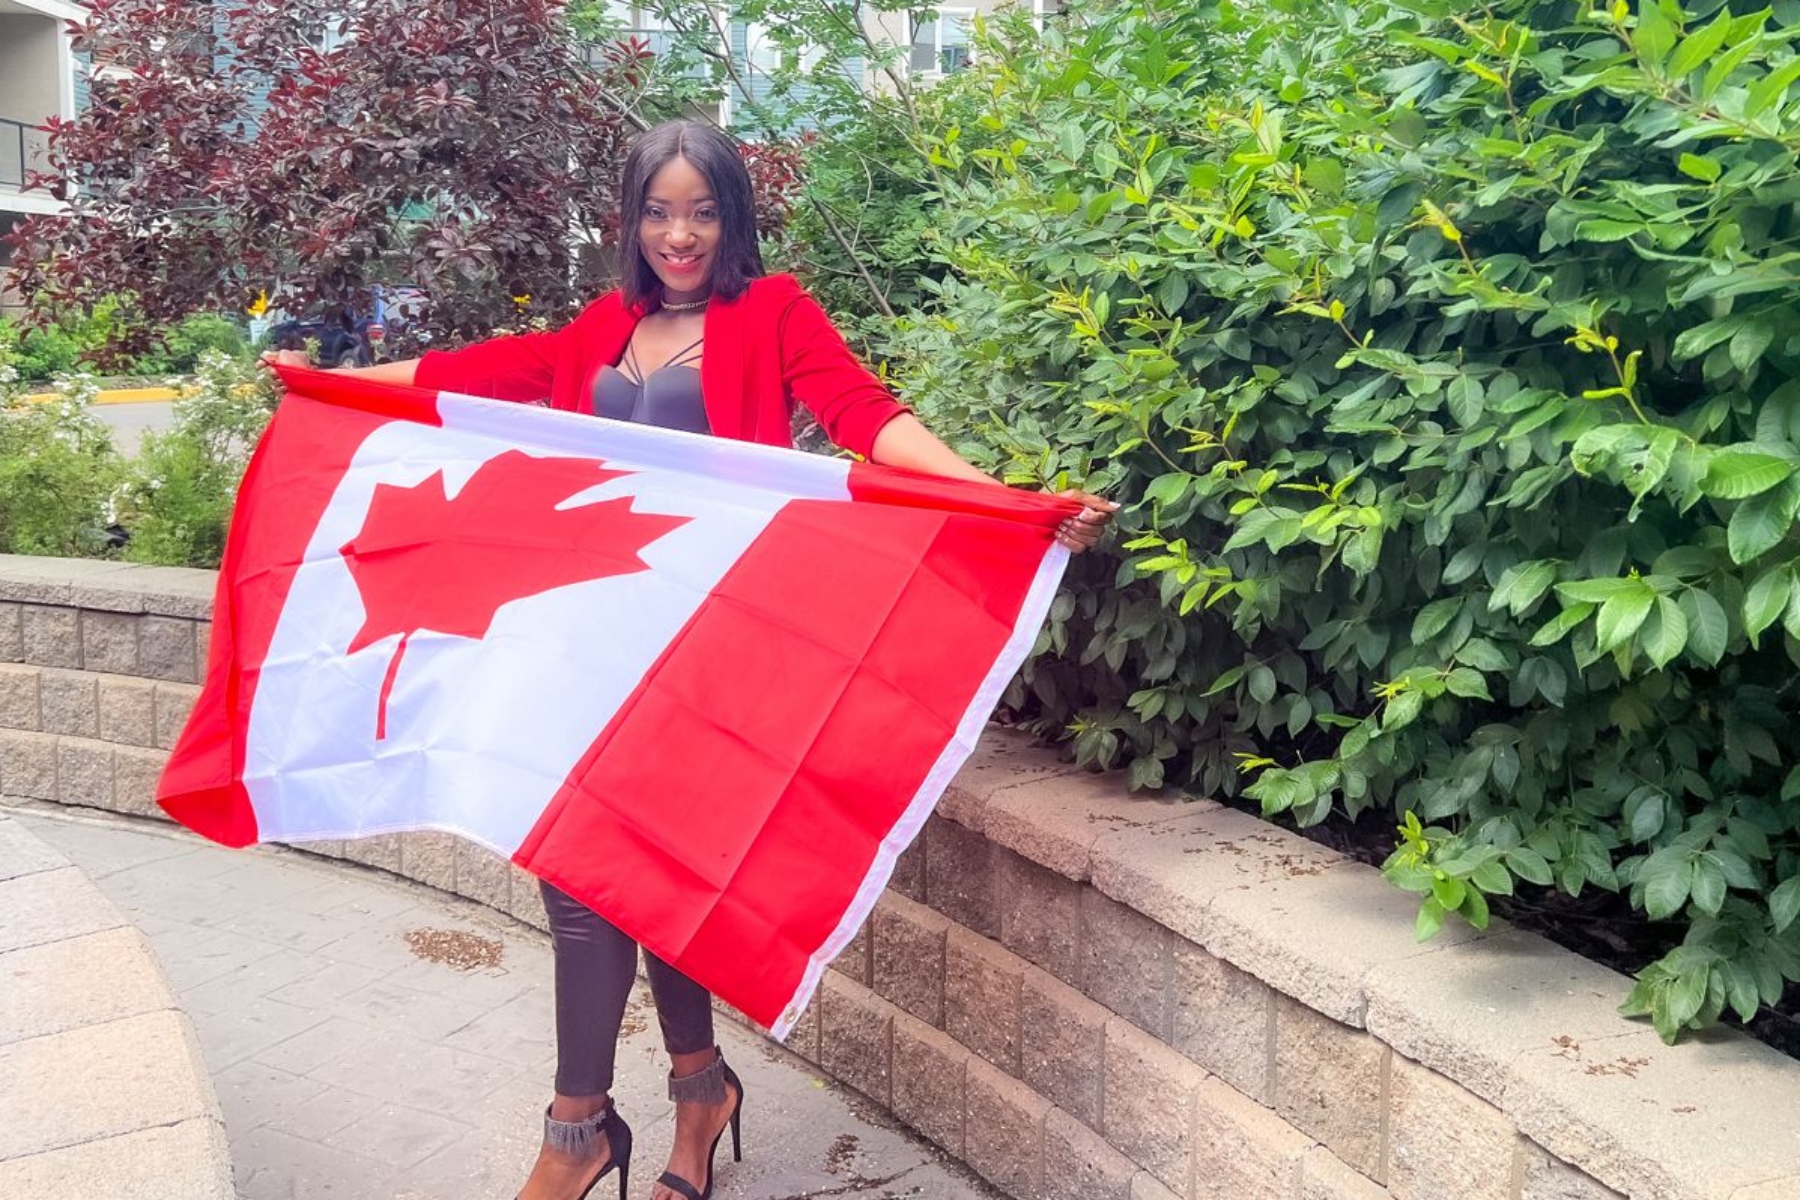 From student visa holder to Canadian citizen: How studying in Canada gave this Nigerian a fresh start in life